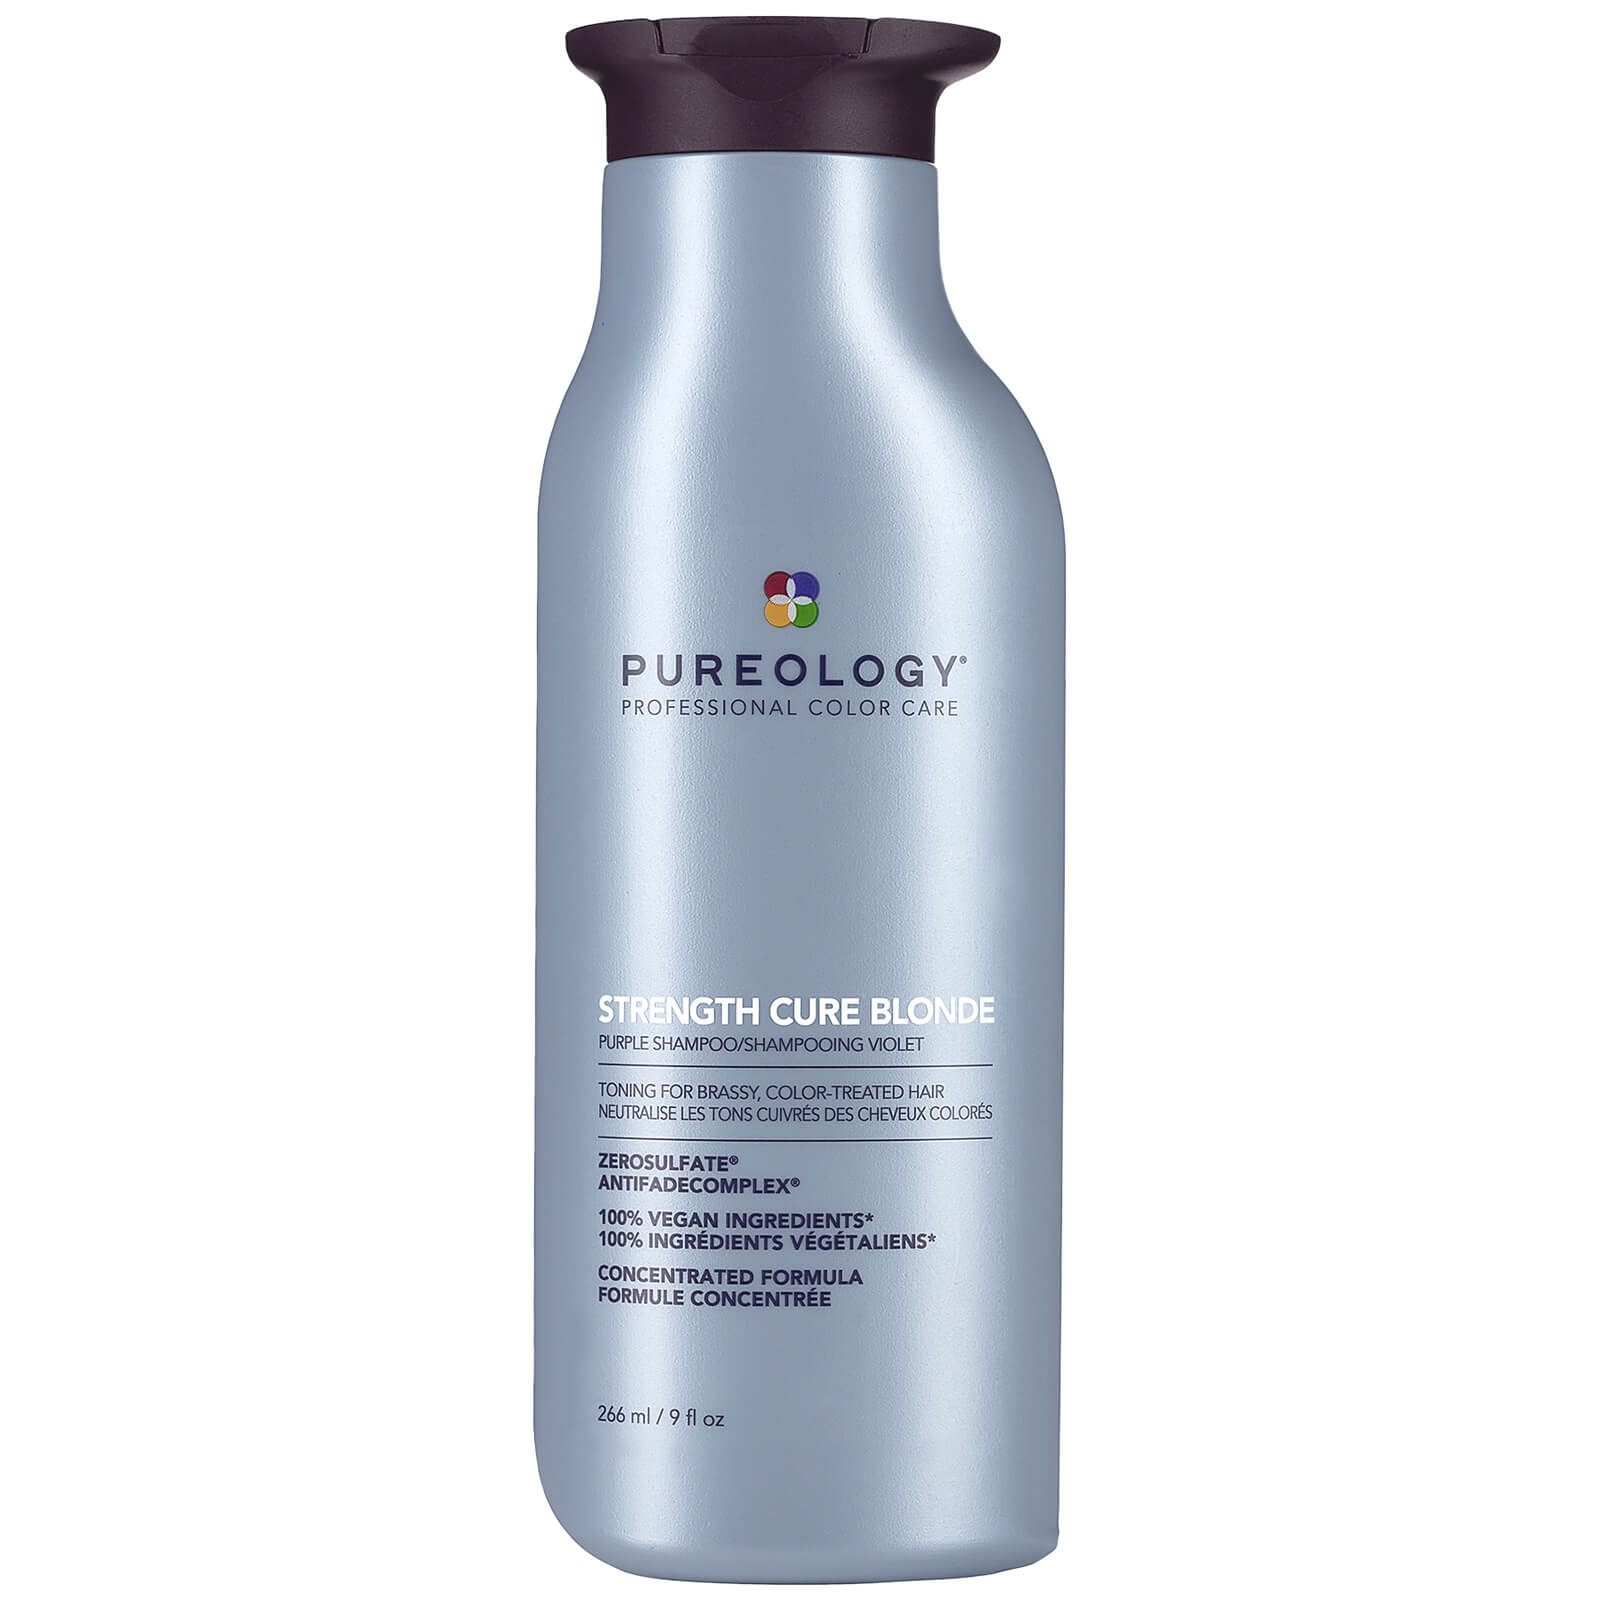 Image of Pureology Strength Cure Blonde Shampoo 266ml